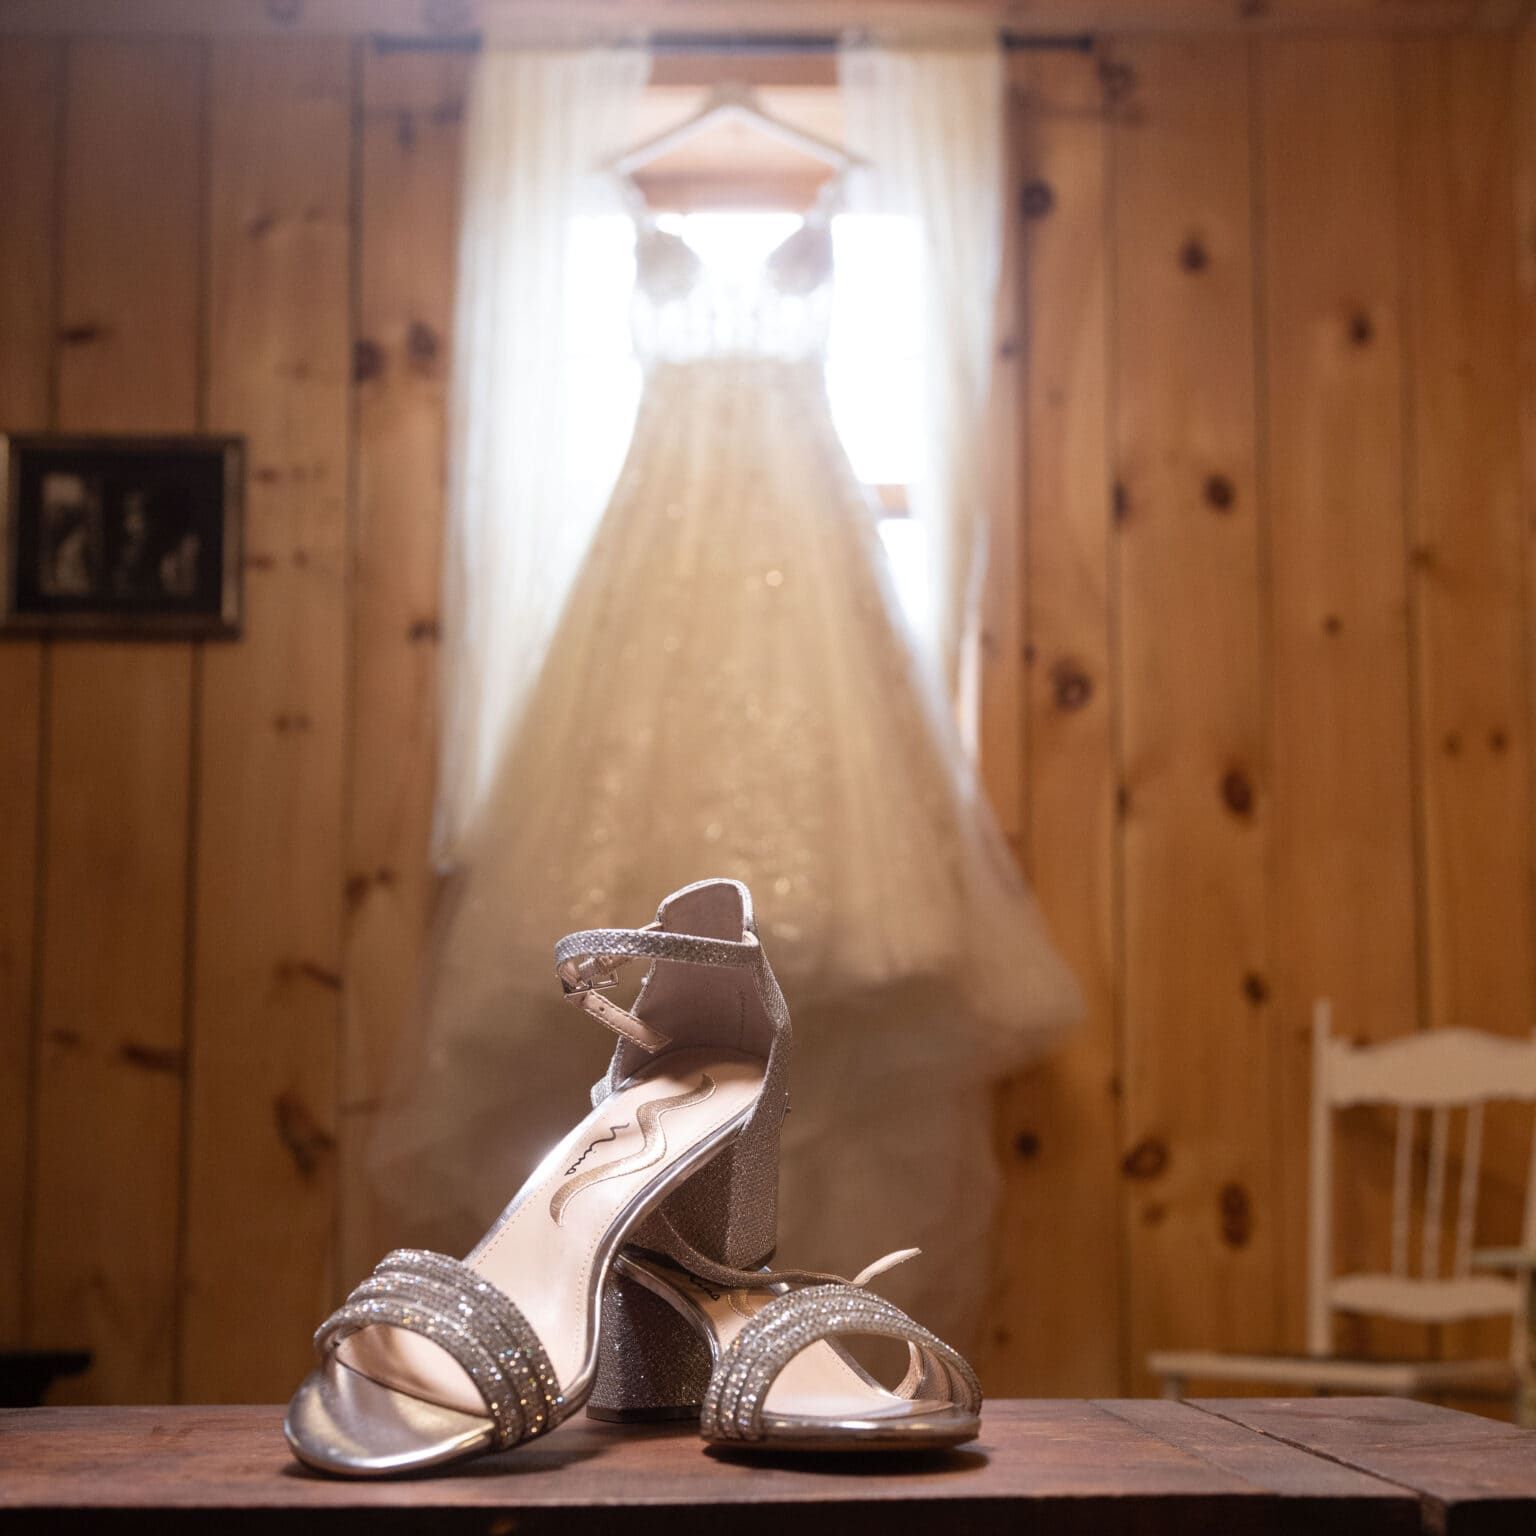 A pair of wedding shoes sit on a table in front of a wedding dress